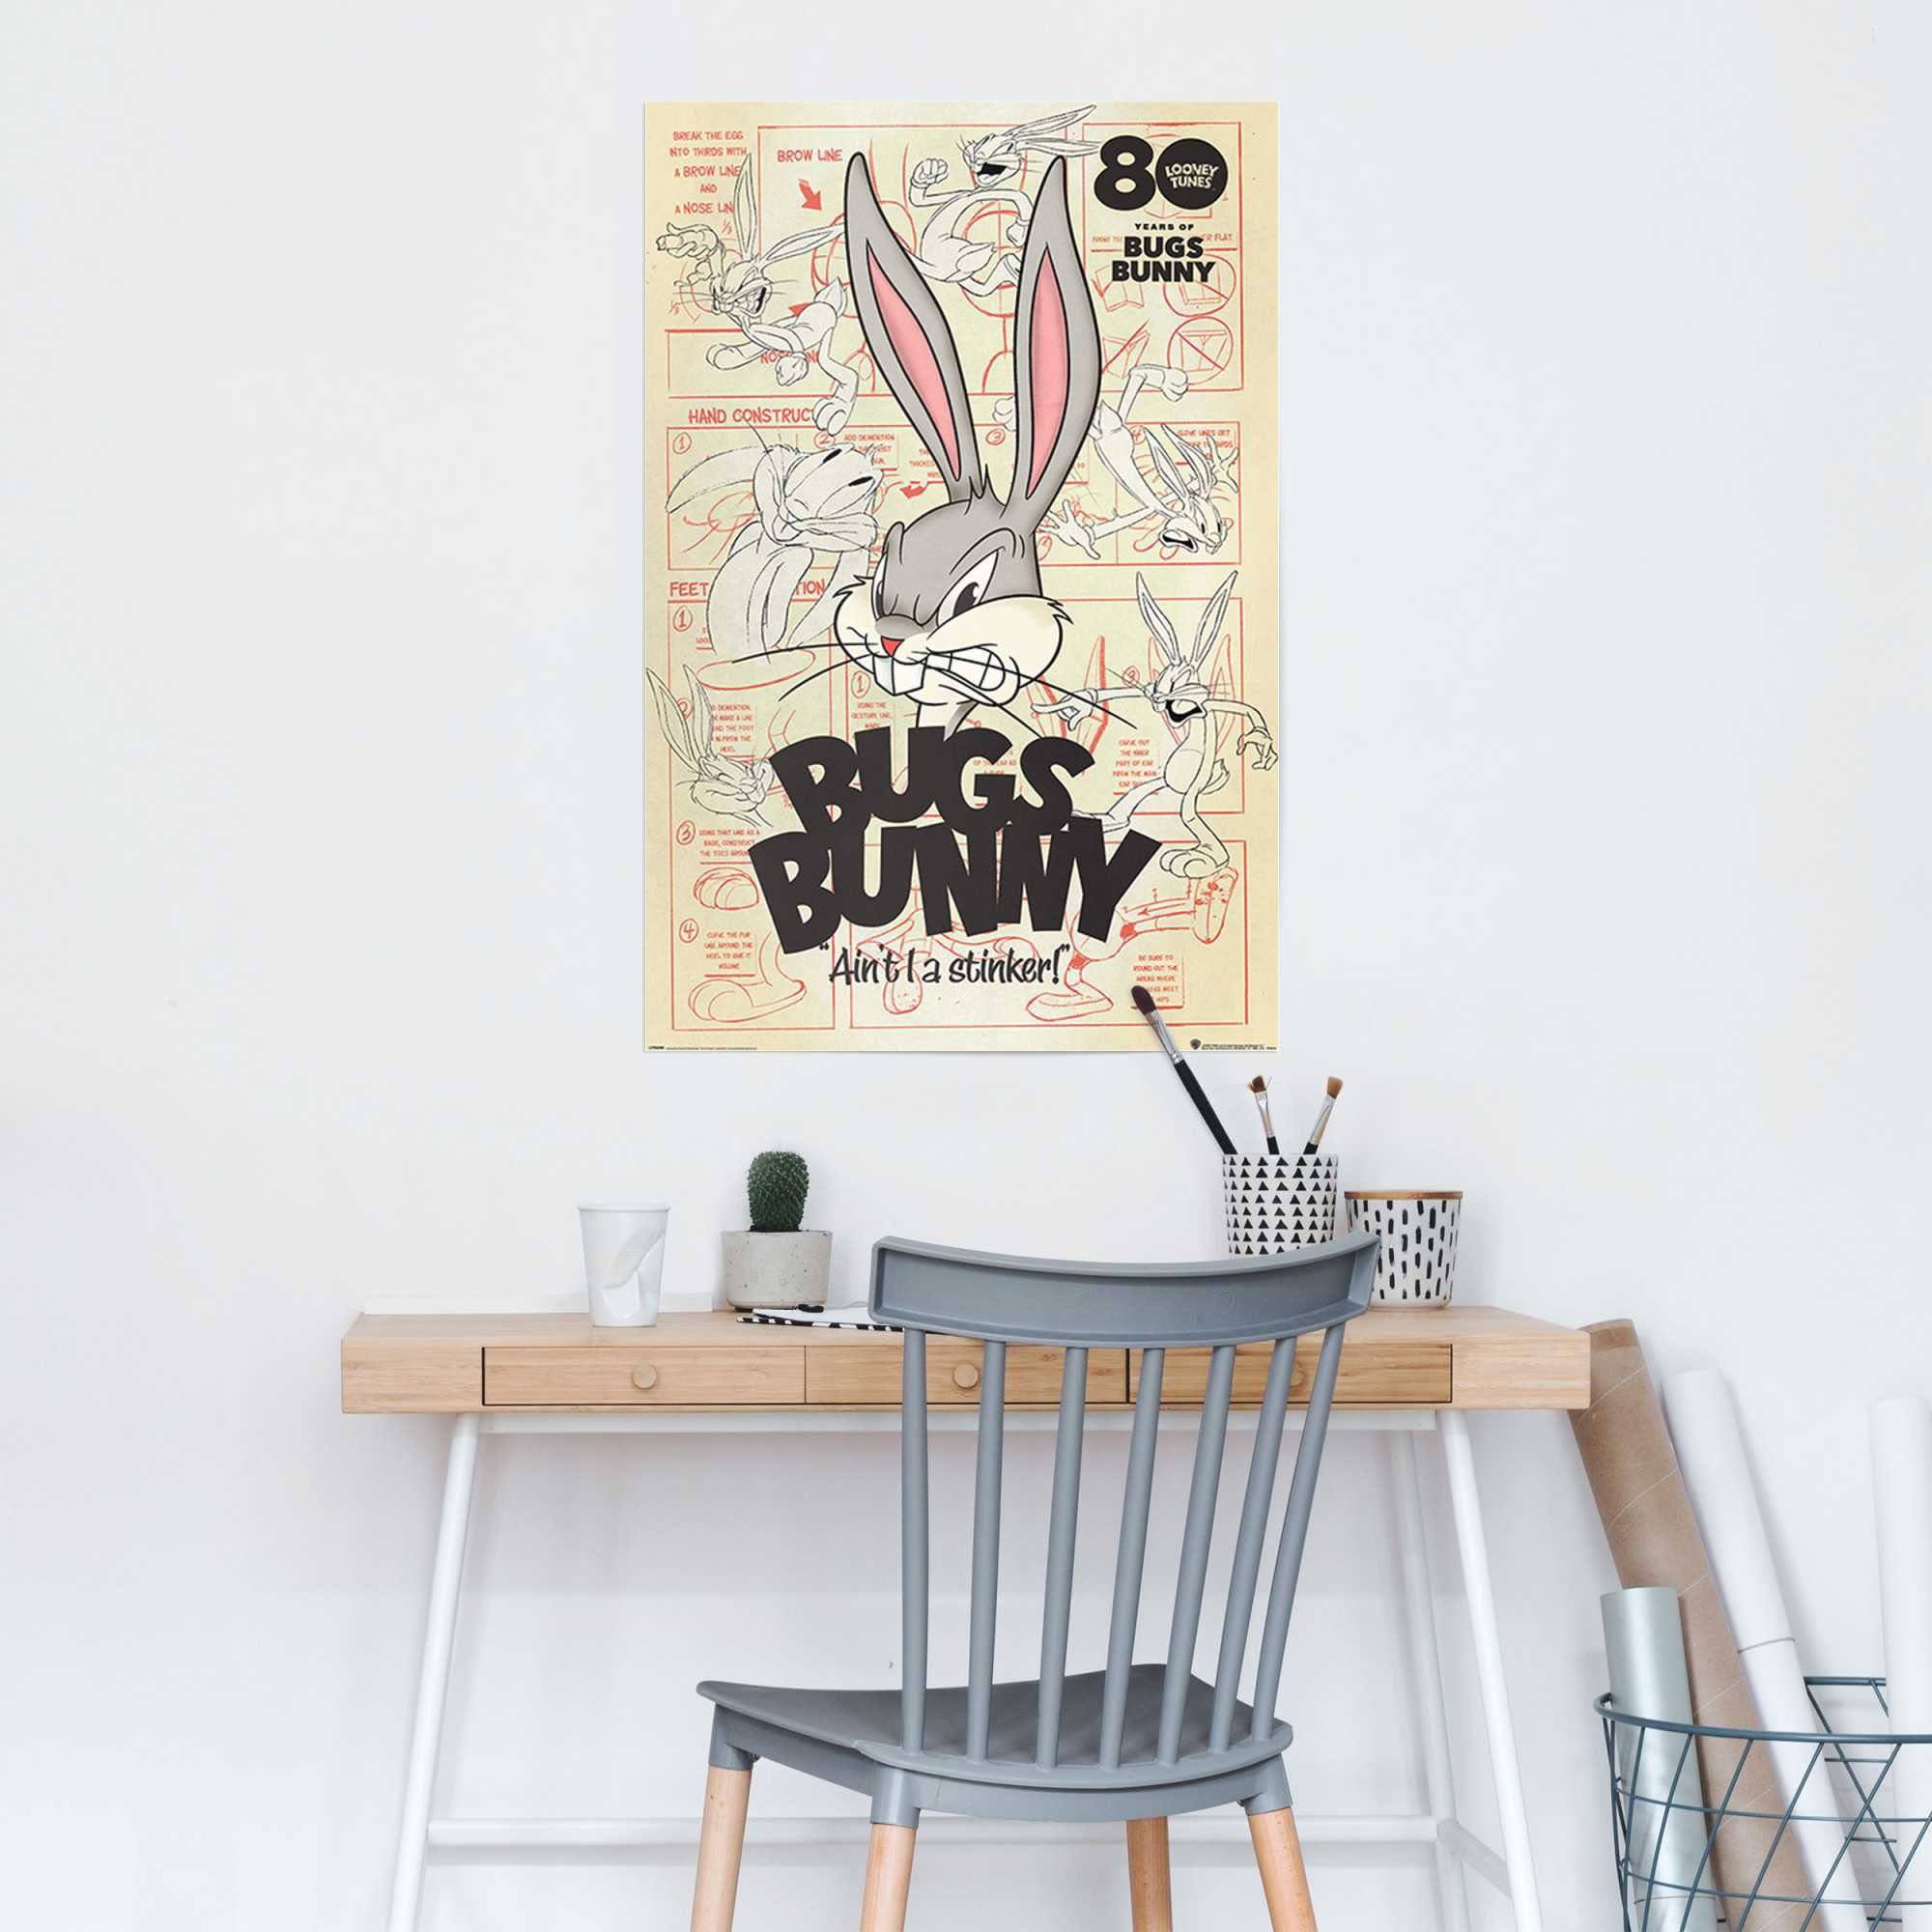 Bros Poster (1 Looney Reinders! Bugs Bunny - a St) stinker I - Hase, Tunes Warner ait